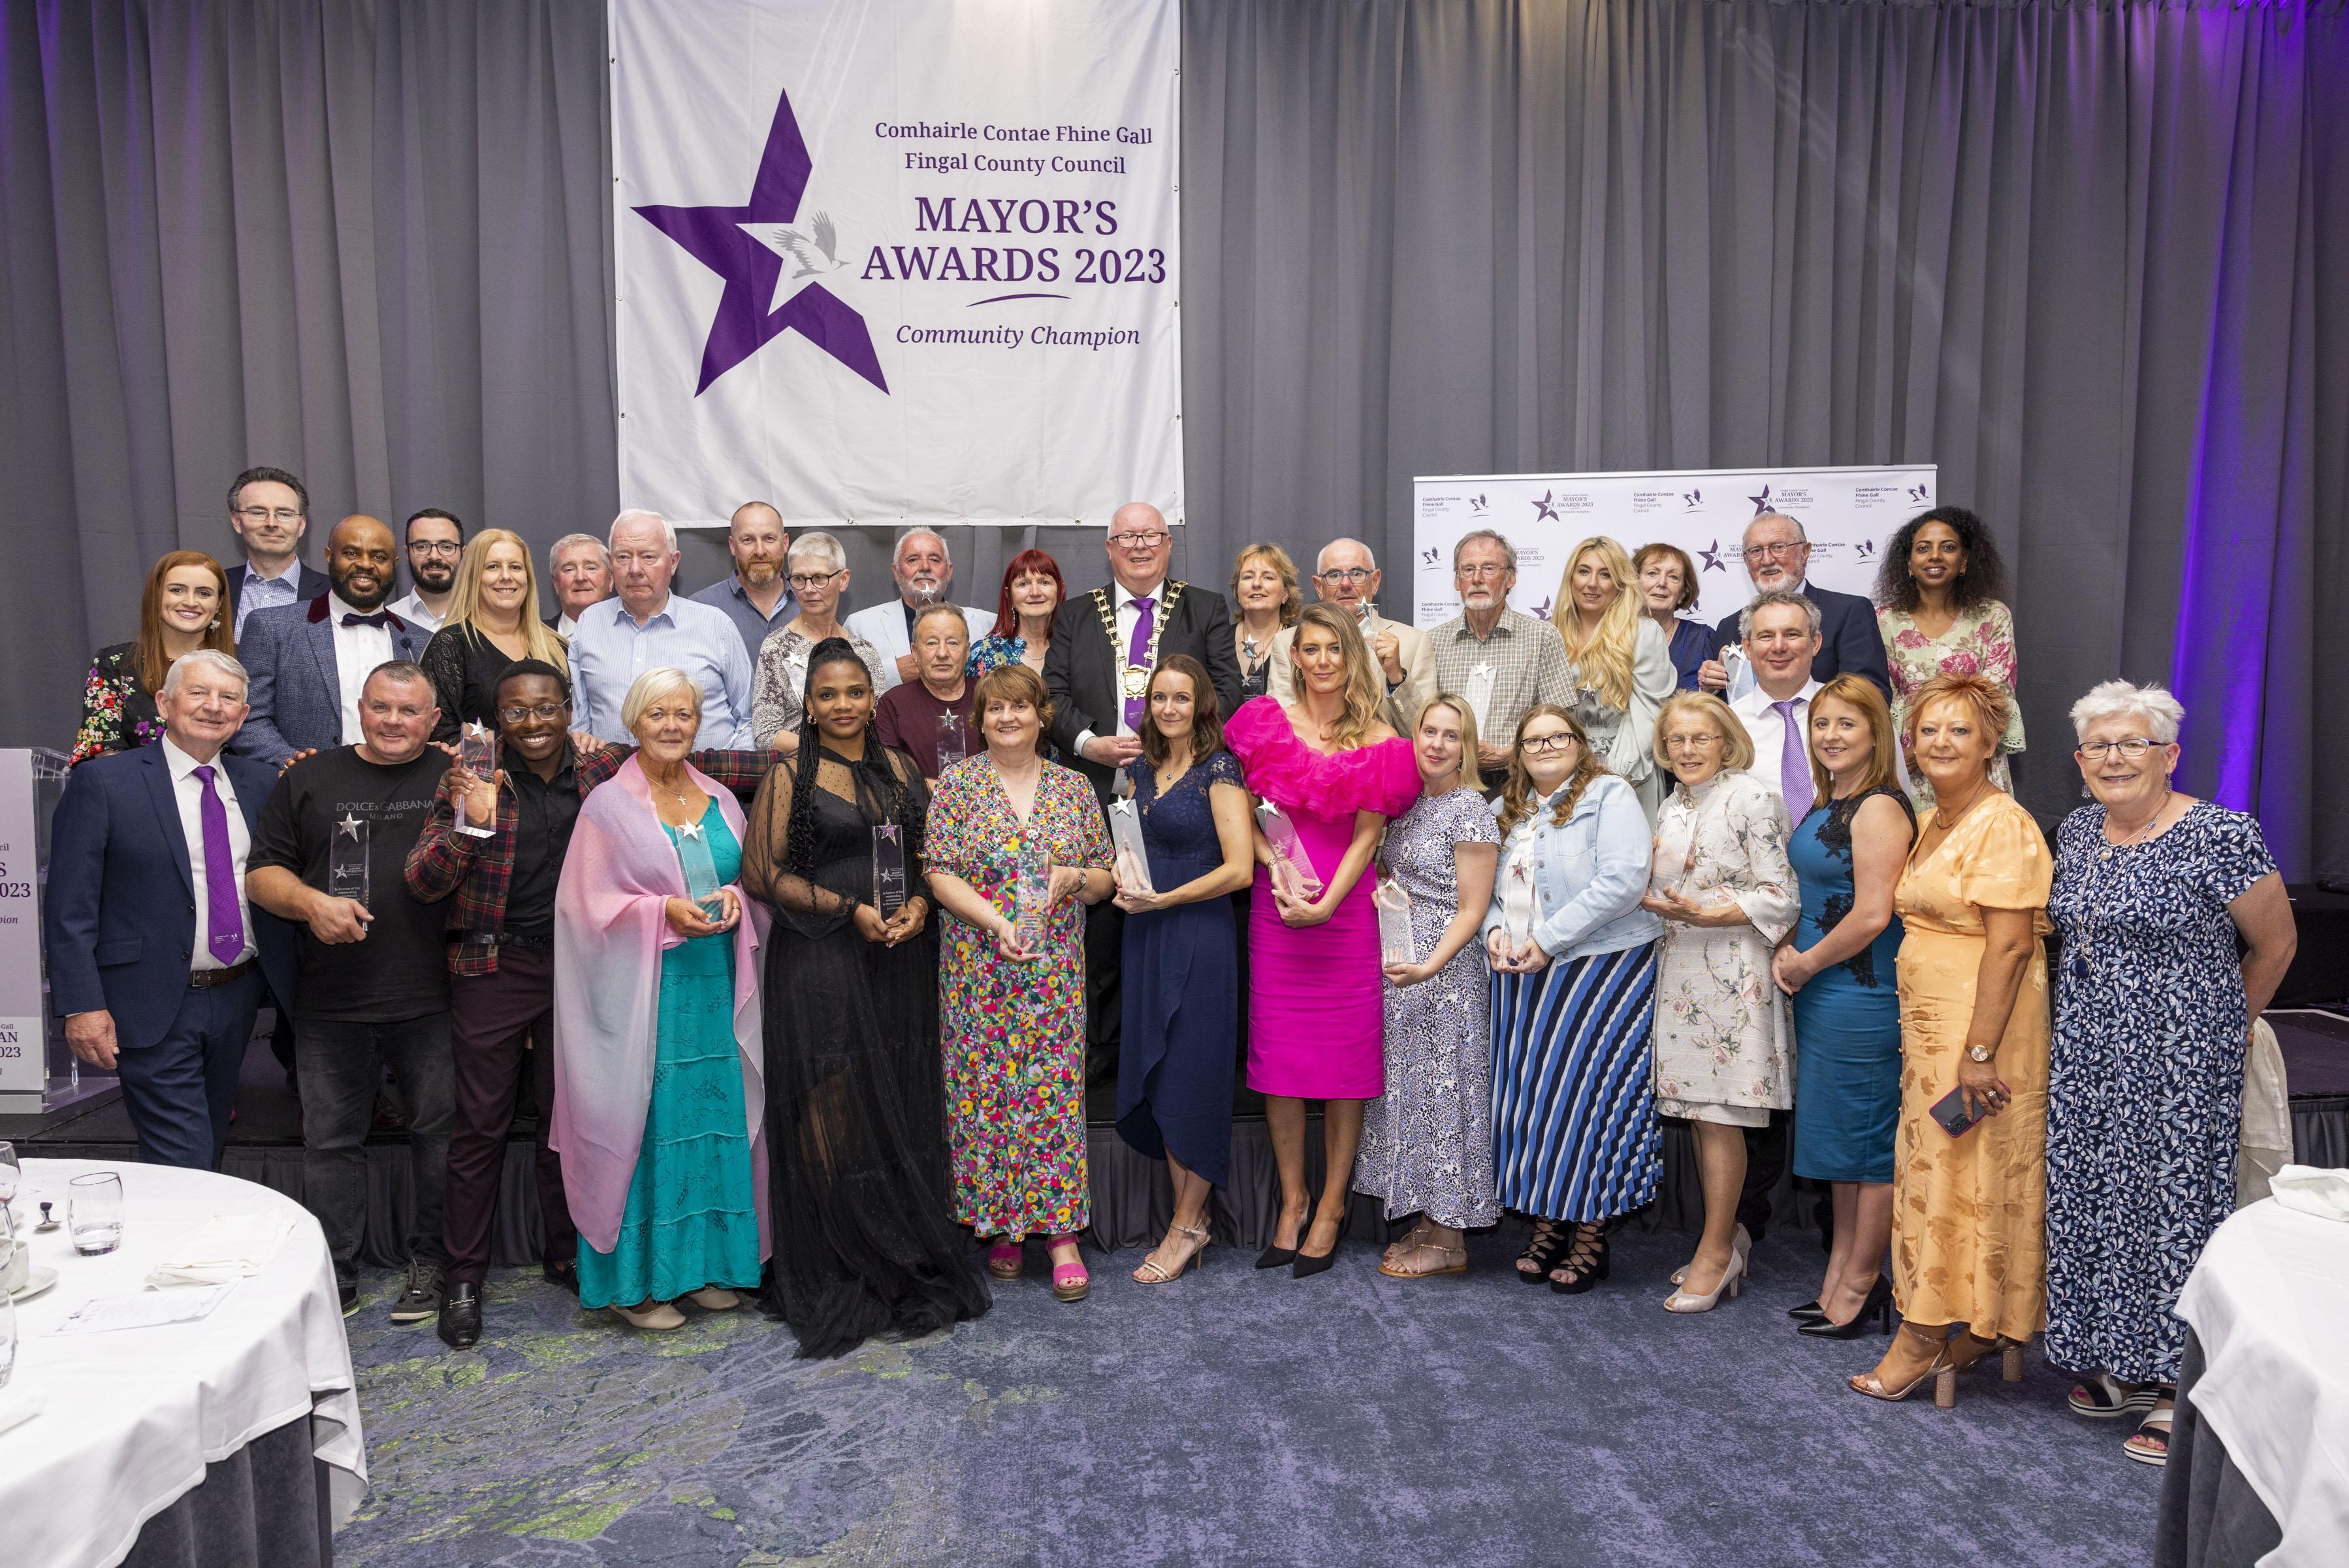 Mayor of Fingal, Cllr Howard Mahony and fellow Councillors, with the winners of the at the Fingal County Council Mayor's Awards 2023,  for Community Champions, at the Crowne Plaza Hotel, Blanchardstown, Dublin 15.